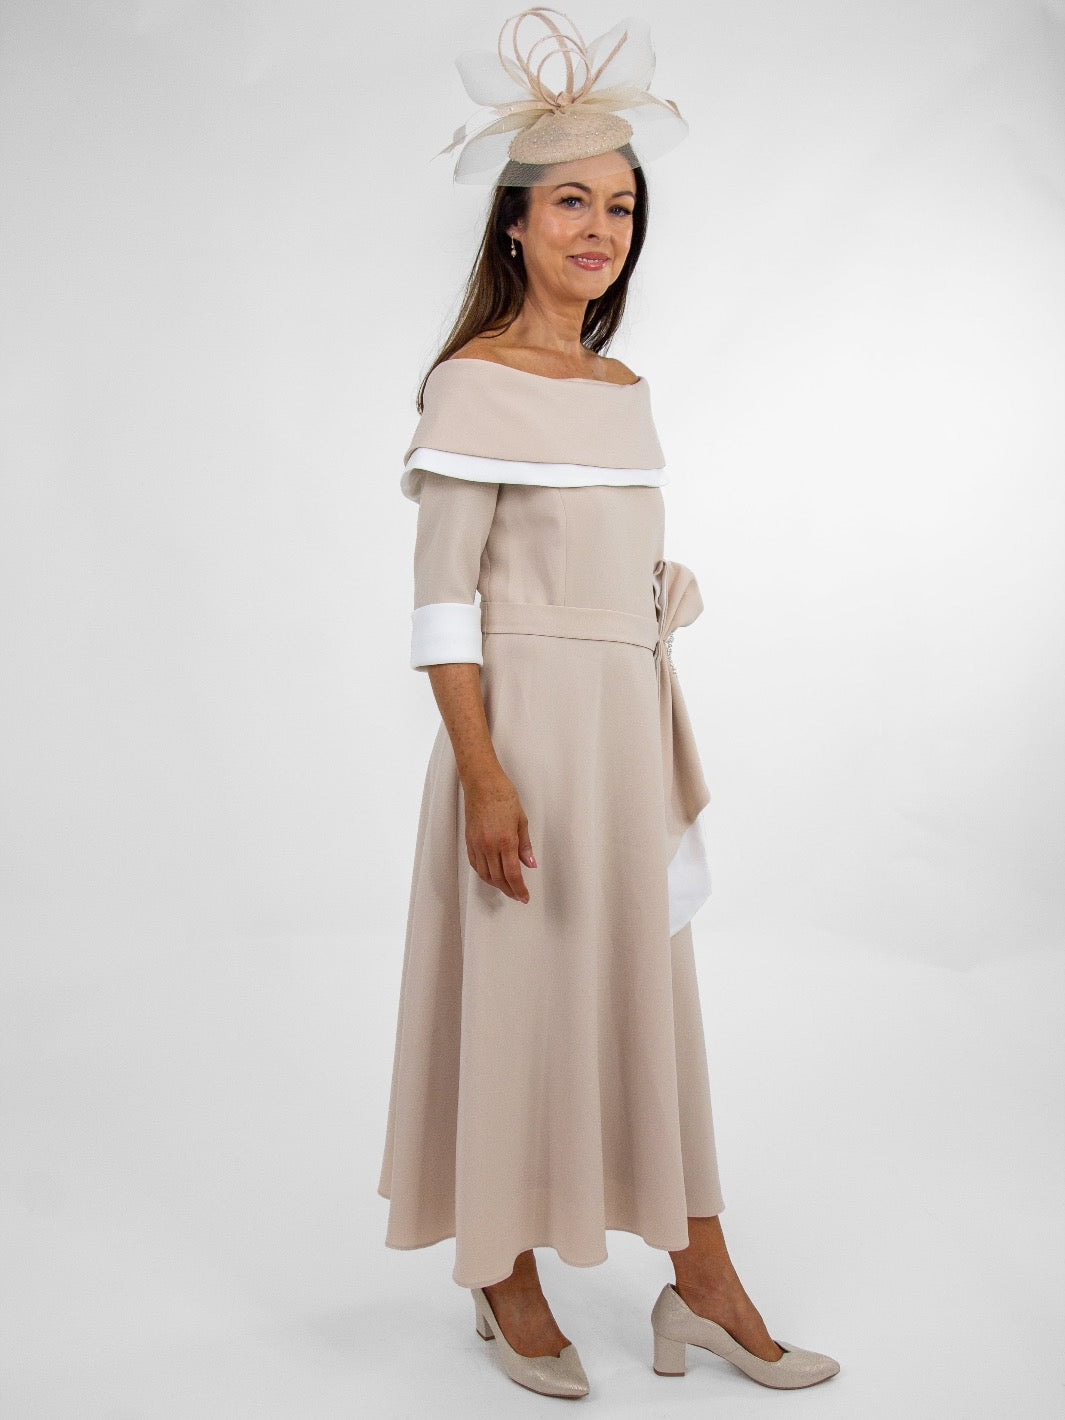 Claudia C Sylvia Dress In Beige / White-Occasion Wear-Guest of the wedding-Nicola Ross